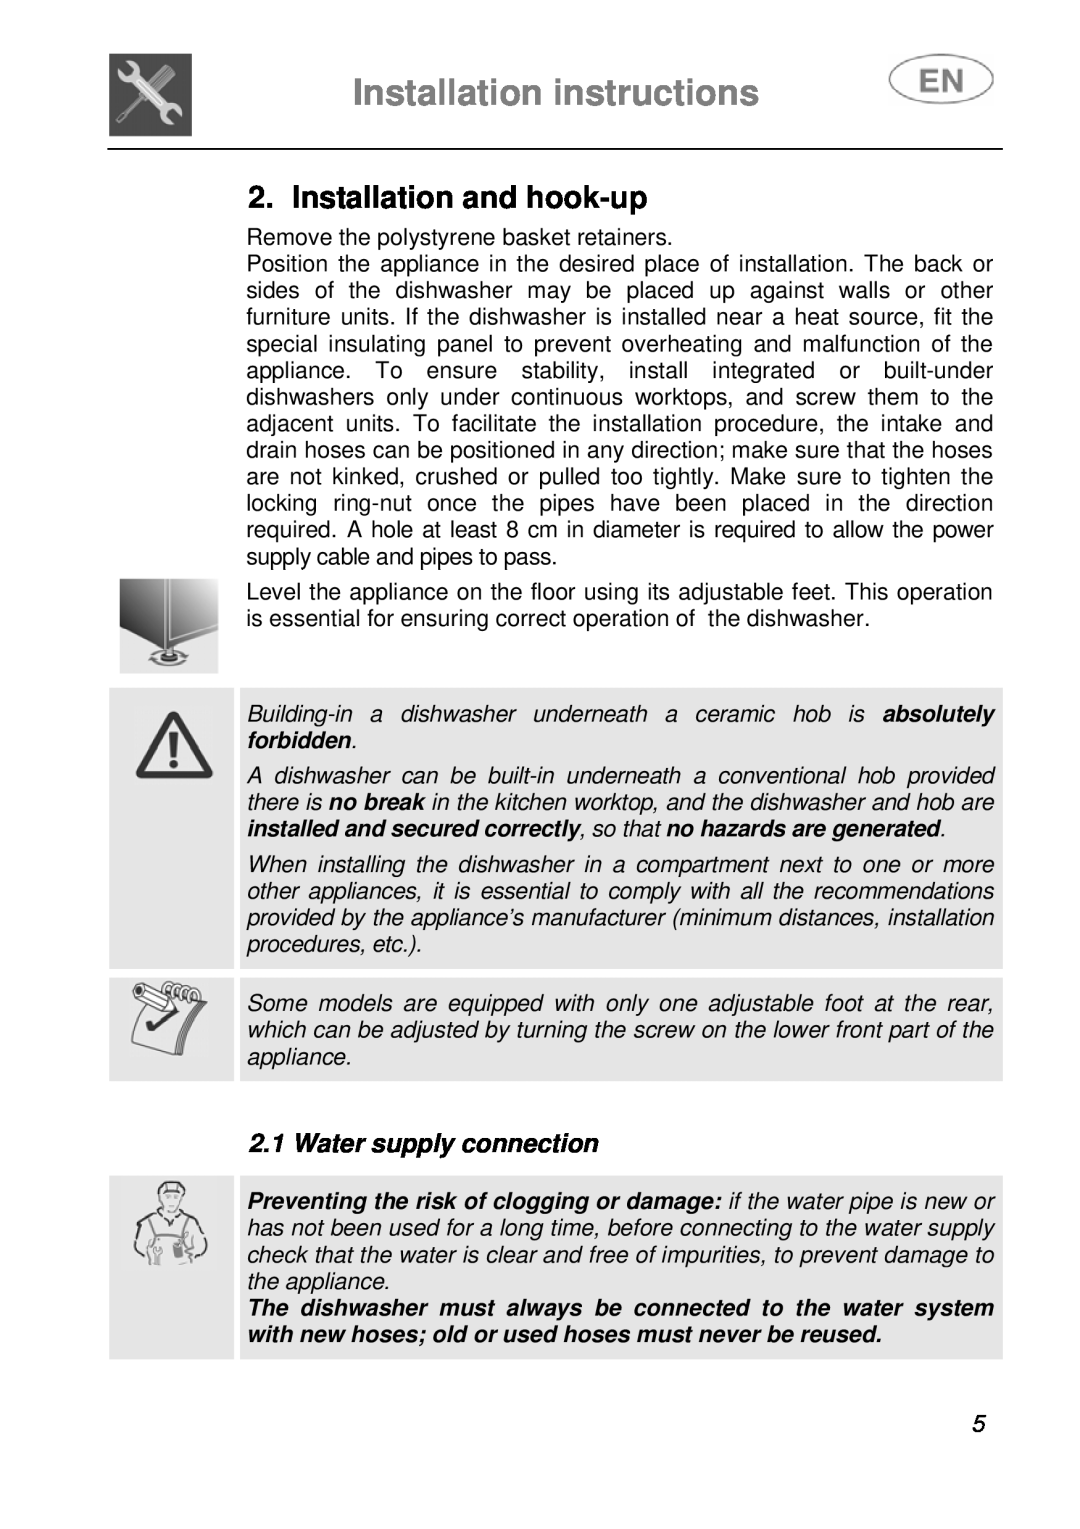 Smeg STA6248, STA6249 instruction manual Installation instructions, Installation and hook-up, Water supply connection 